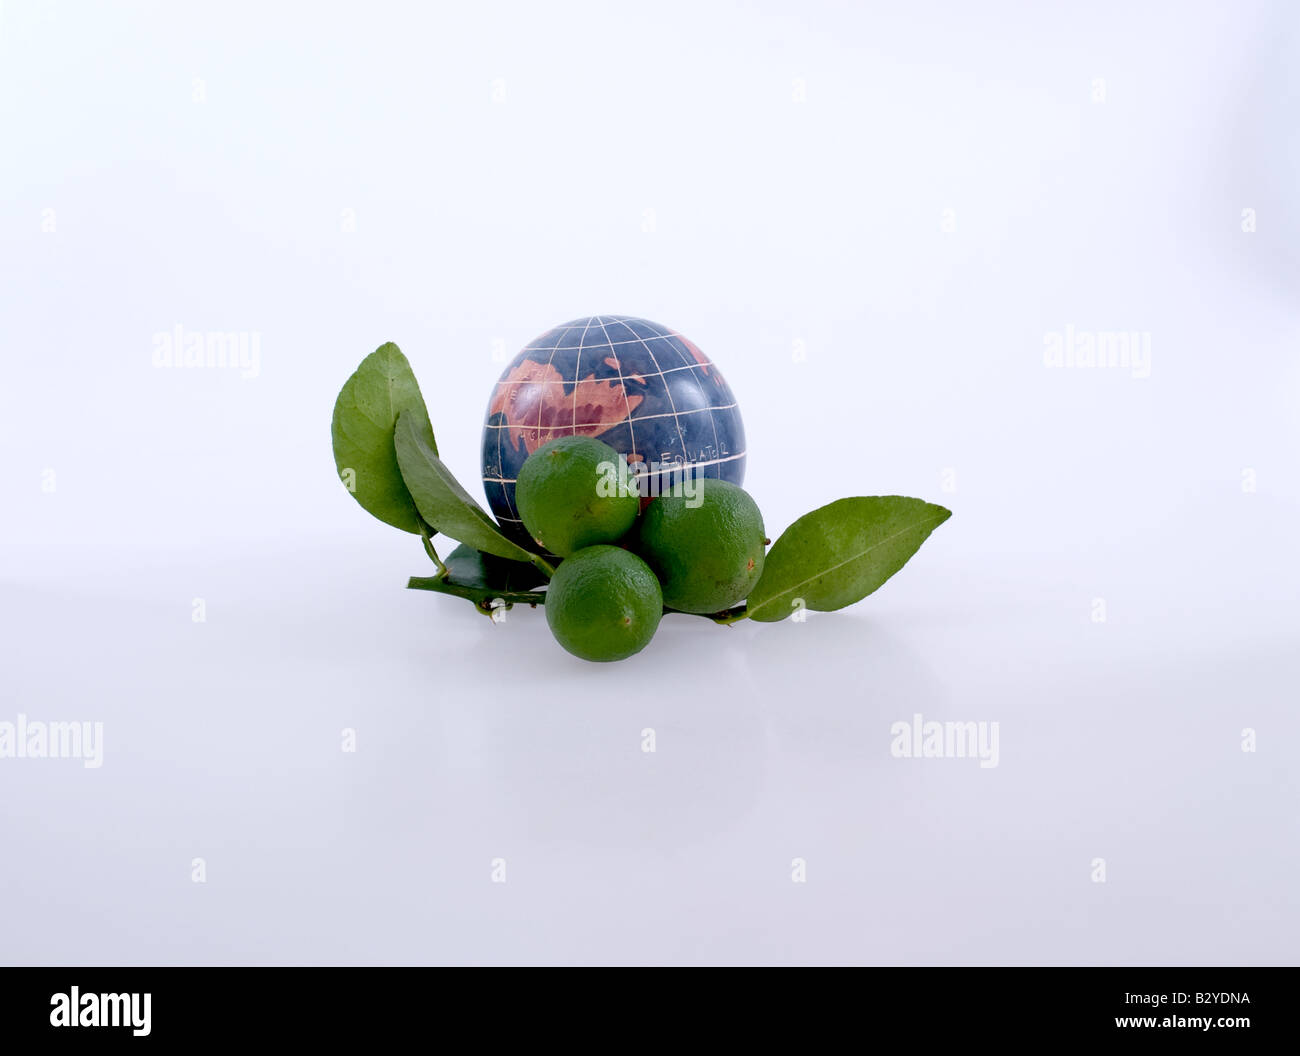 Representation of the world atop a key lime tree branch and fruit. Stock Photo